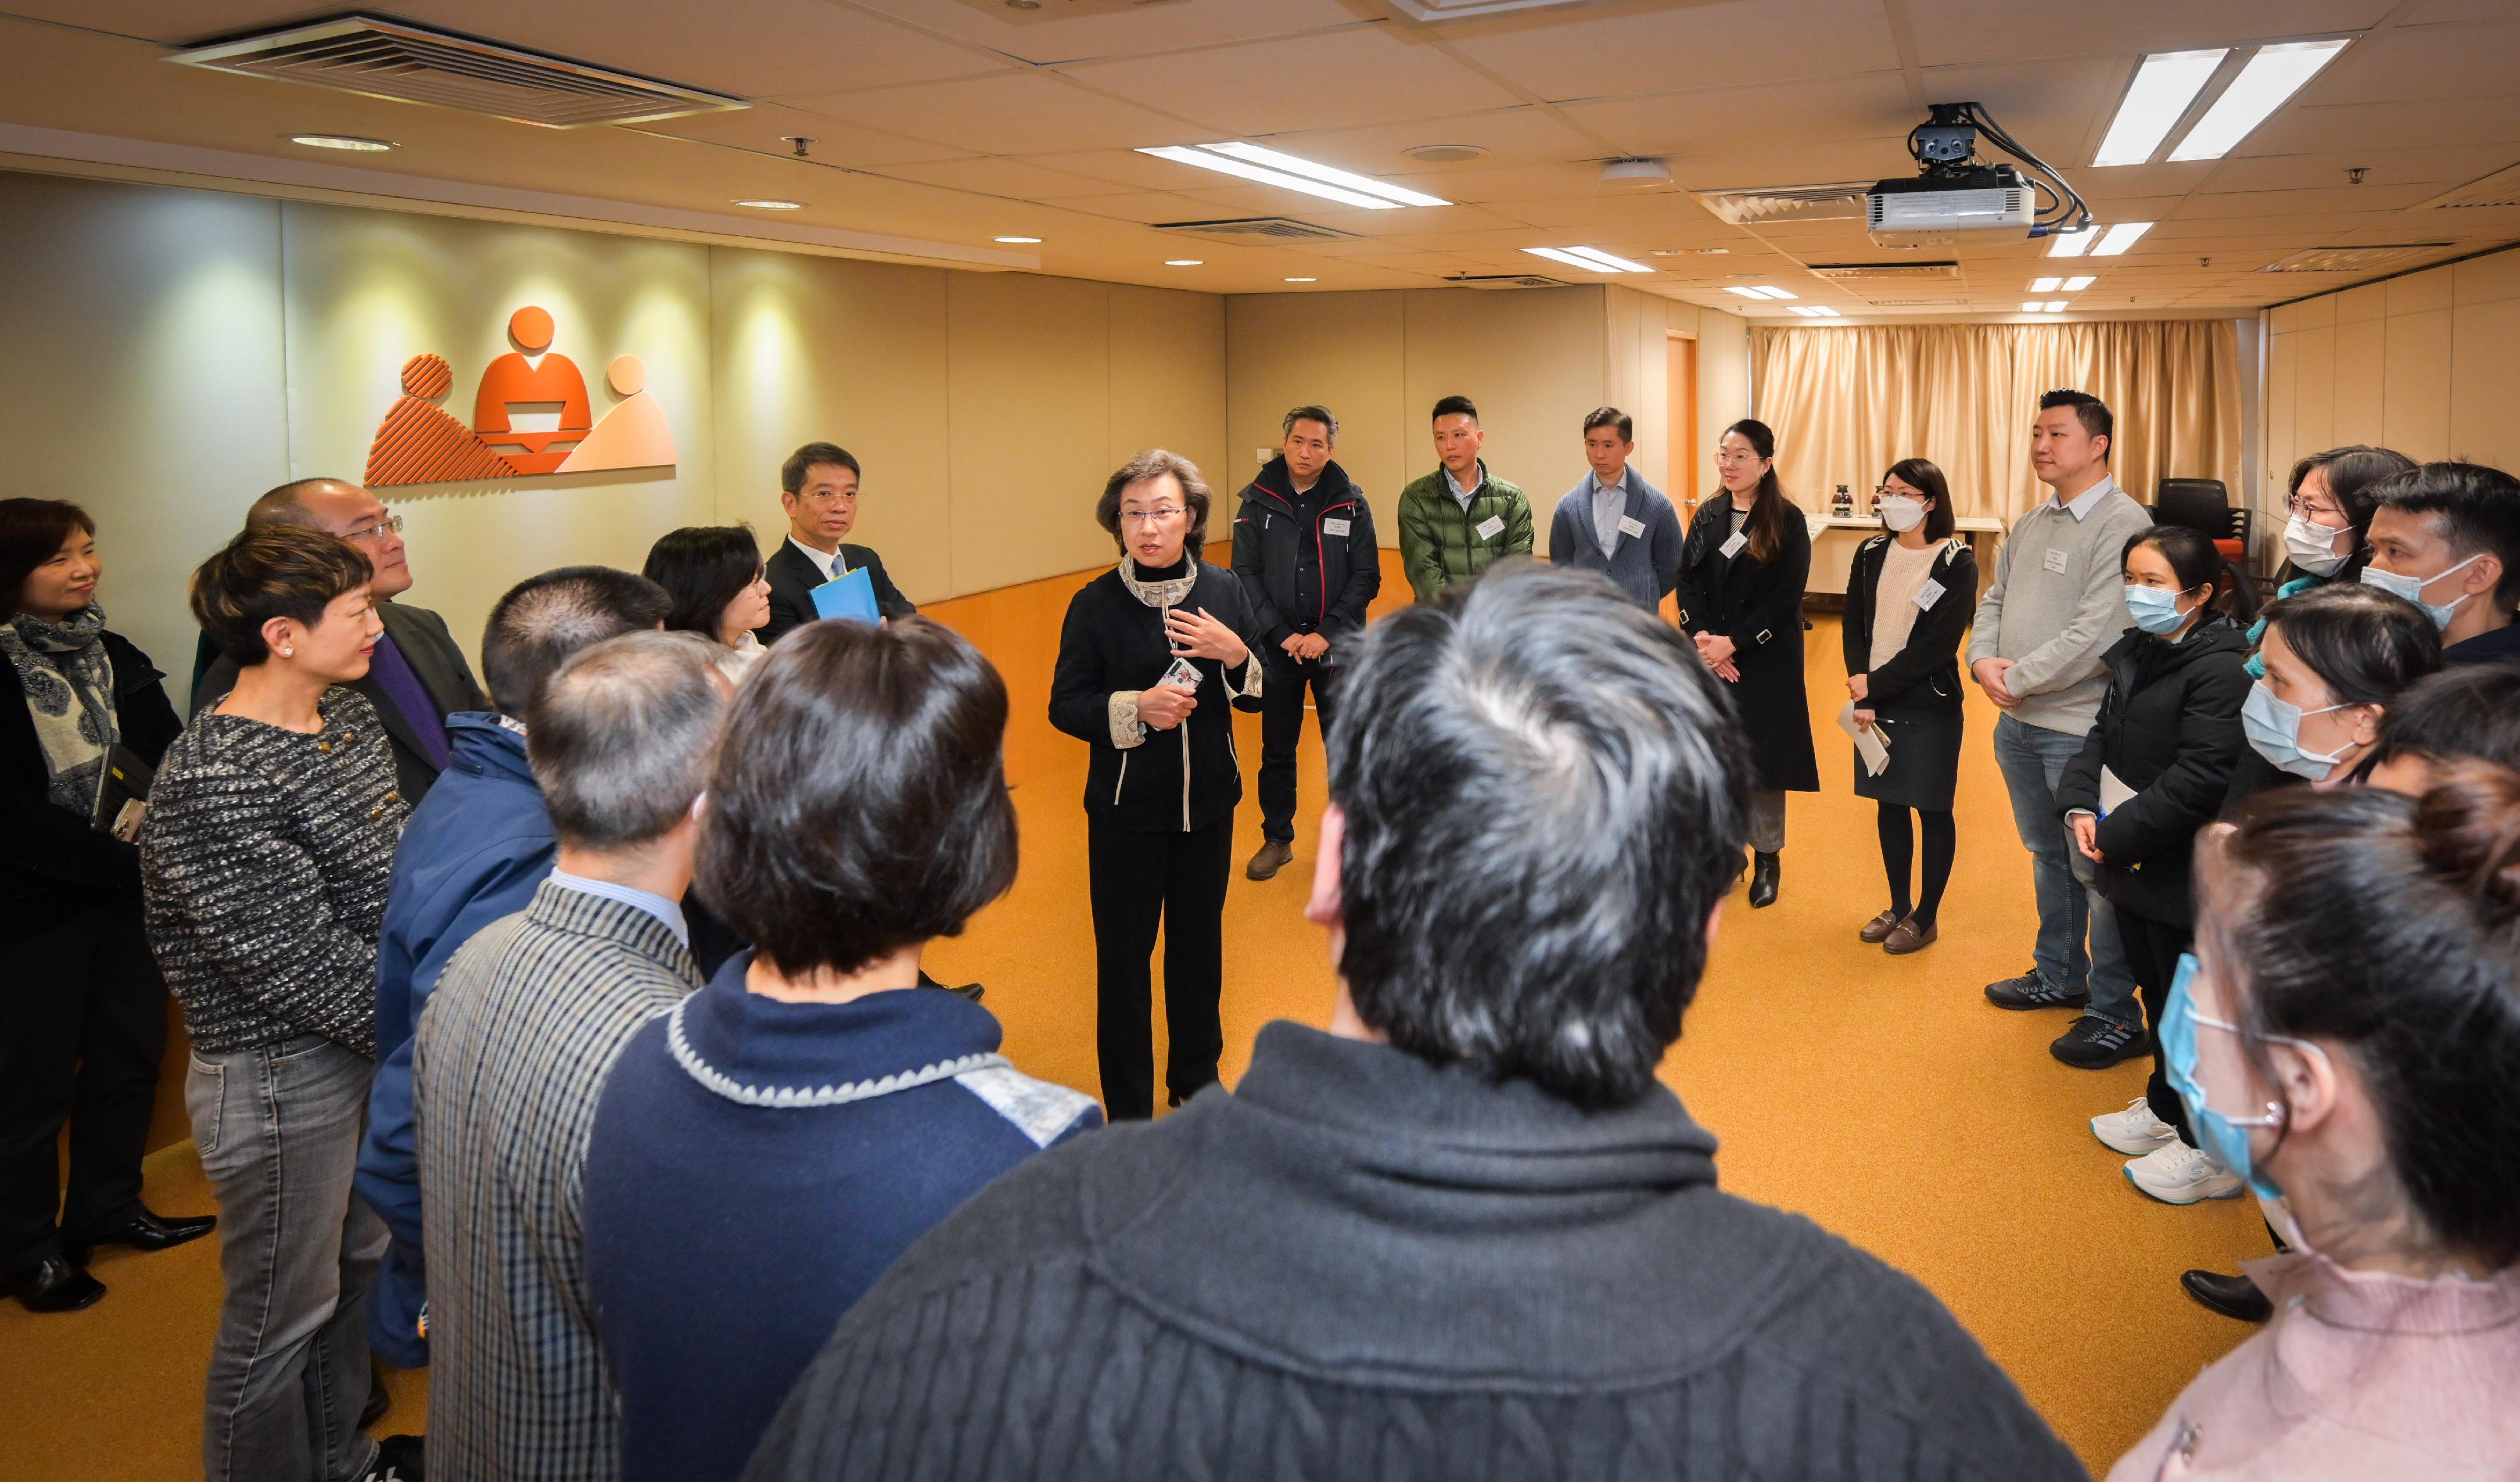 The Secretary for the Civil Service, Mrs Ingrid Yeung, visited the Home Affairs Department today (January 26) to learn about the work and challenges facing the department. Photo shows Mrs Yeung meeting with staff from various grades to collect their views and concerns.